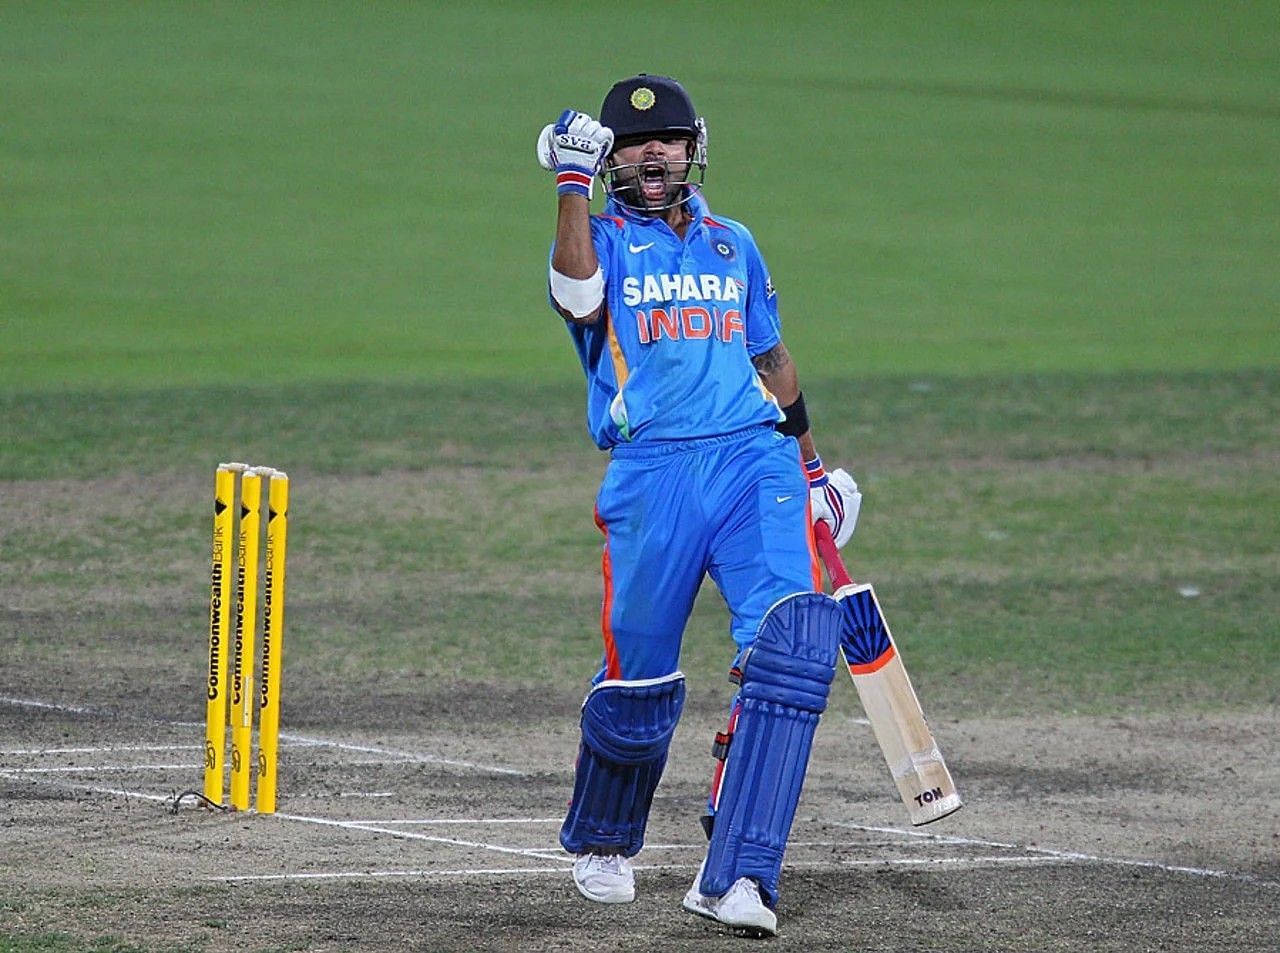 Virat Kohli pumped up after his ton vs SL in 2012 [Getty Images]